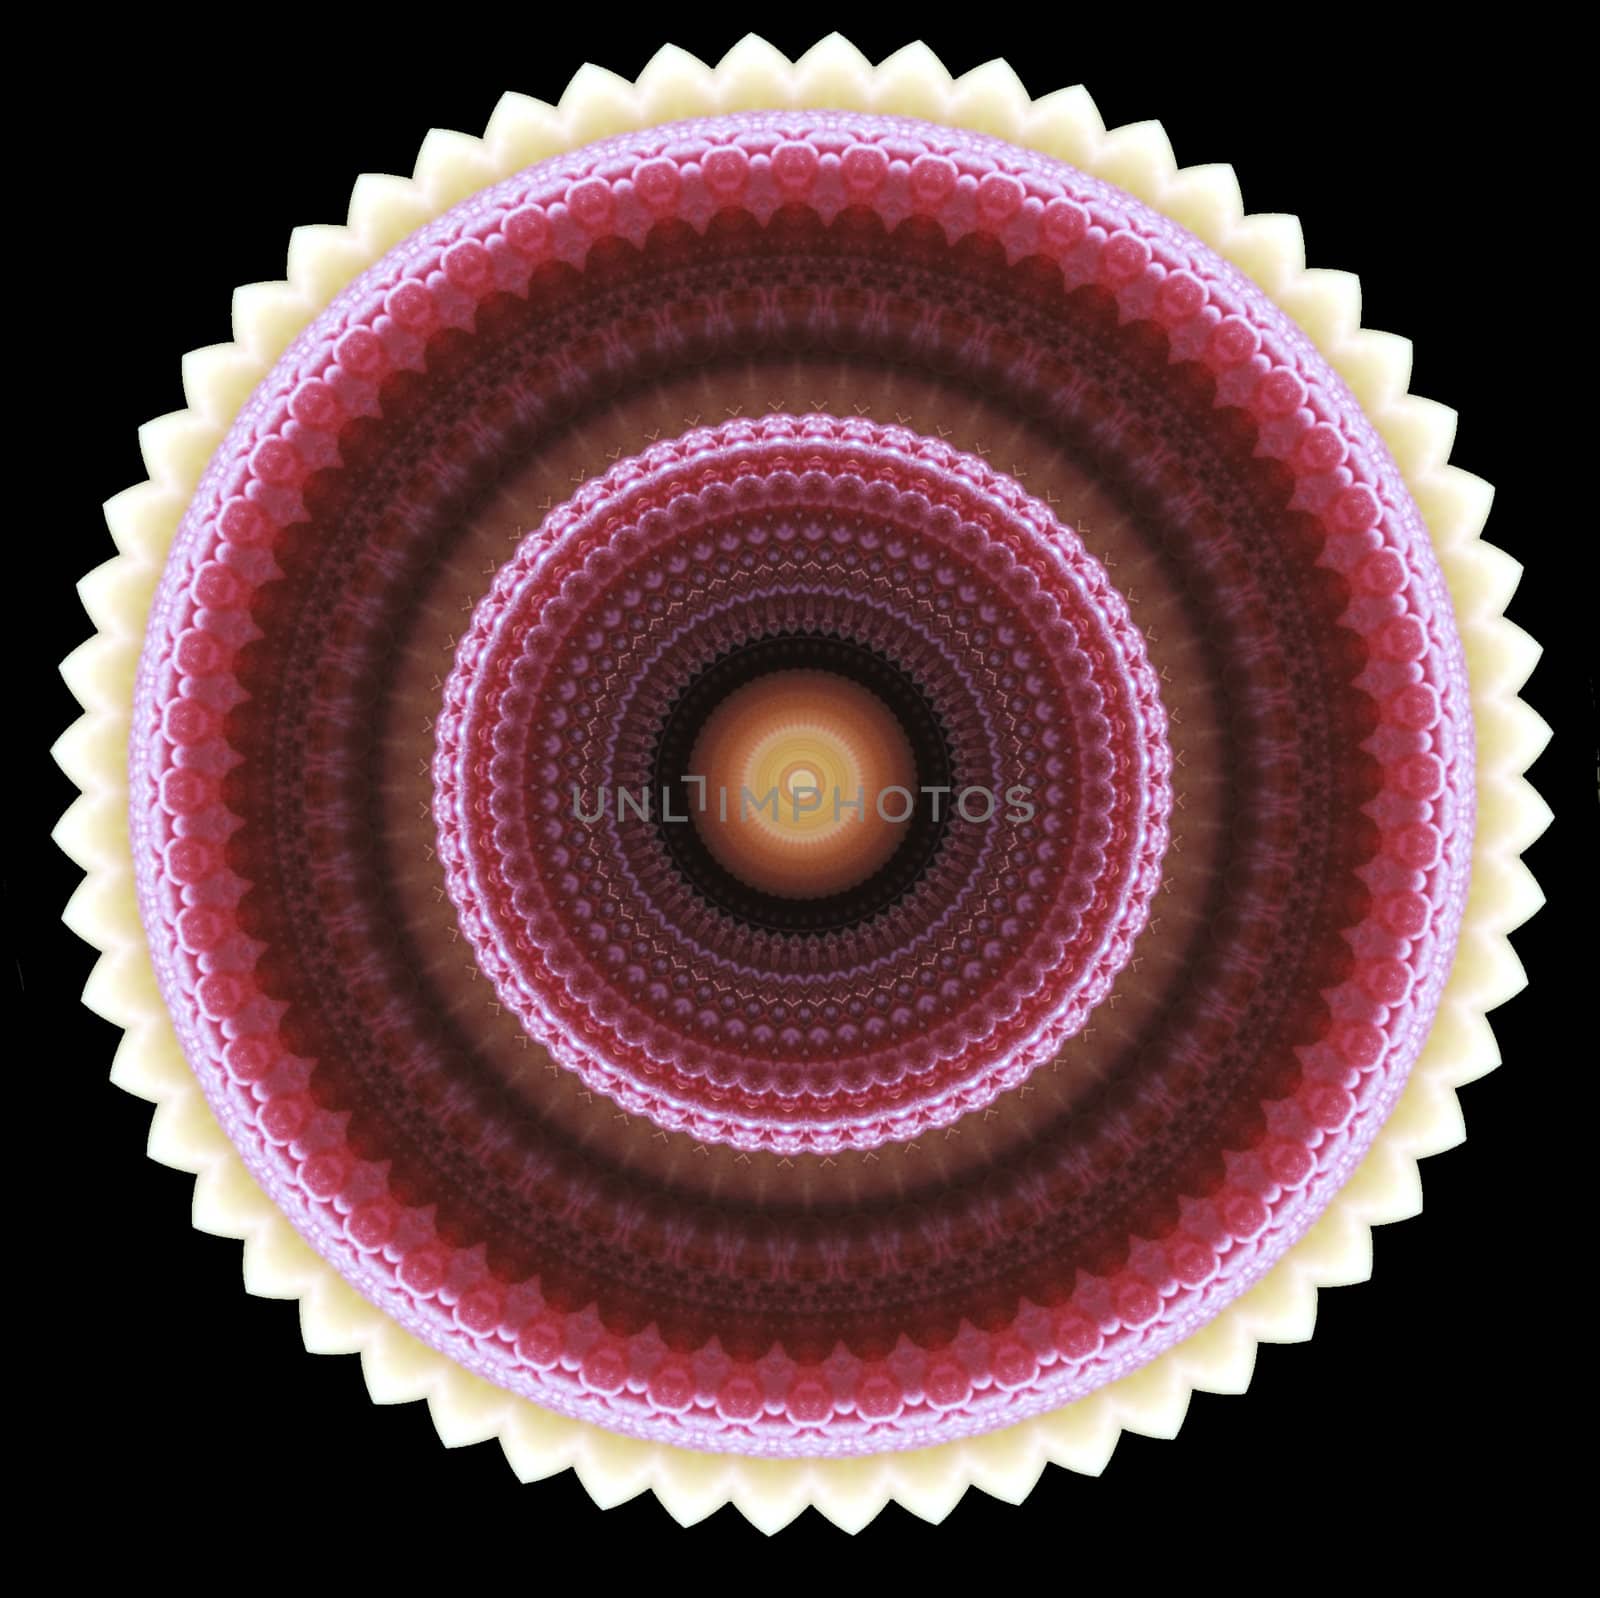 abstract computer-generated image in raspberry magentas with an outer edge resembling pastry